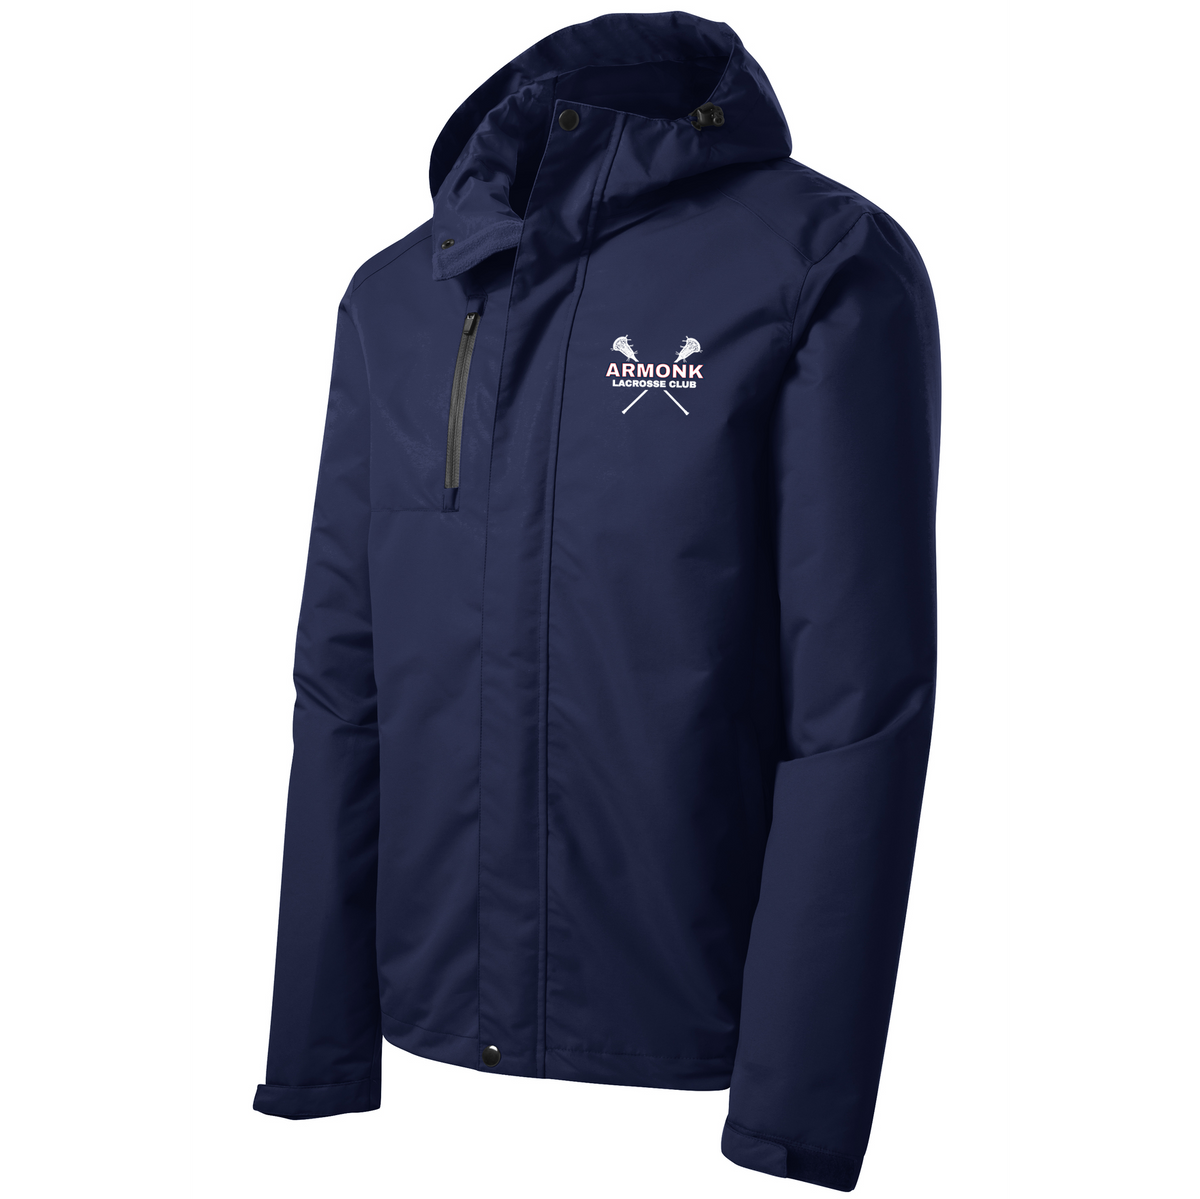 Armonk Lacrosse Club Port Authority All-Conditions Jacket (Adult Only)